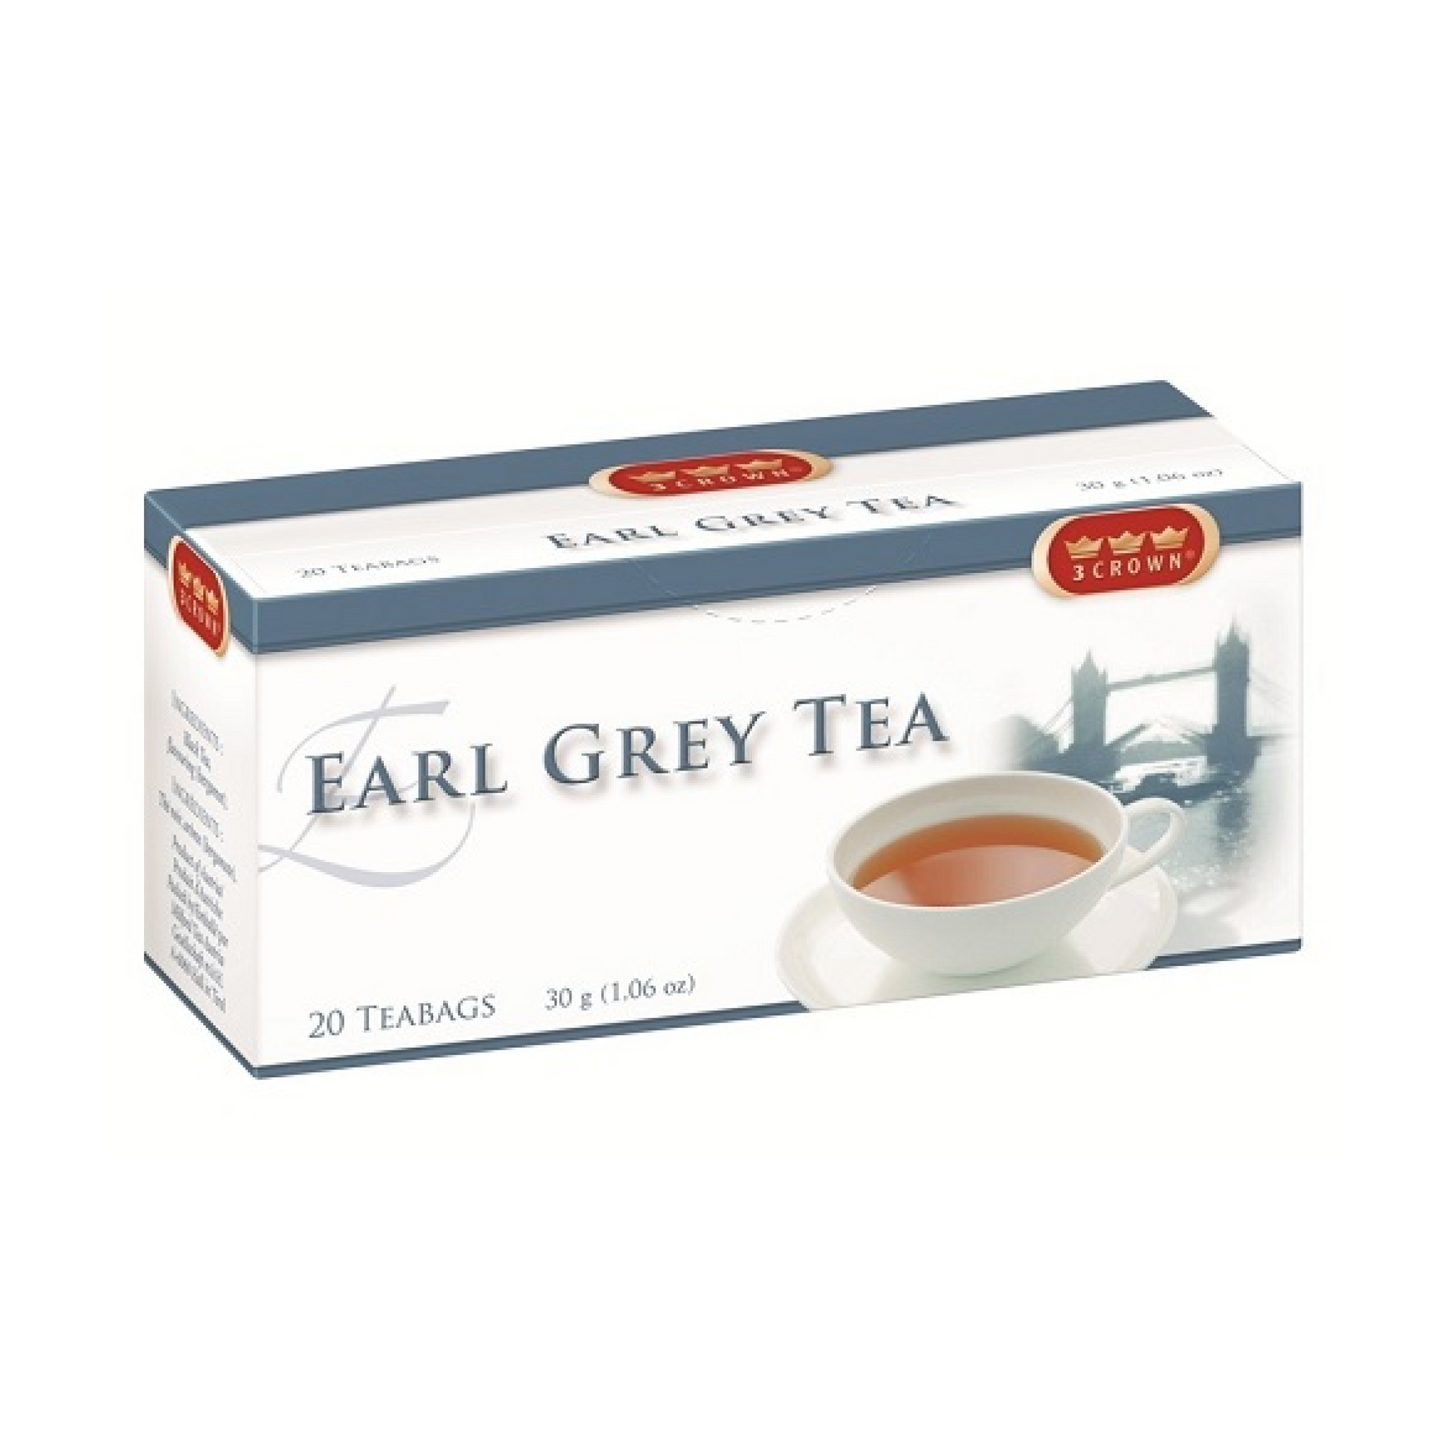 3 Crown Earl Gray with Bergamont Flavouring 30g